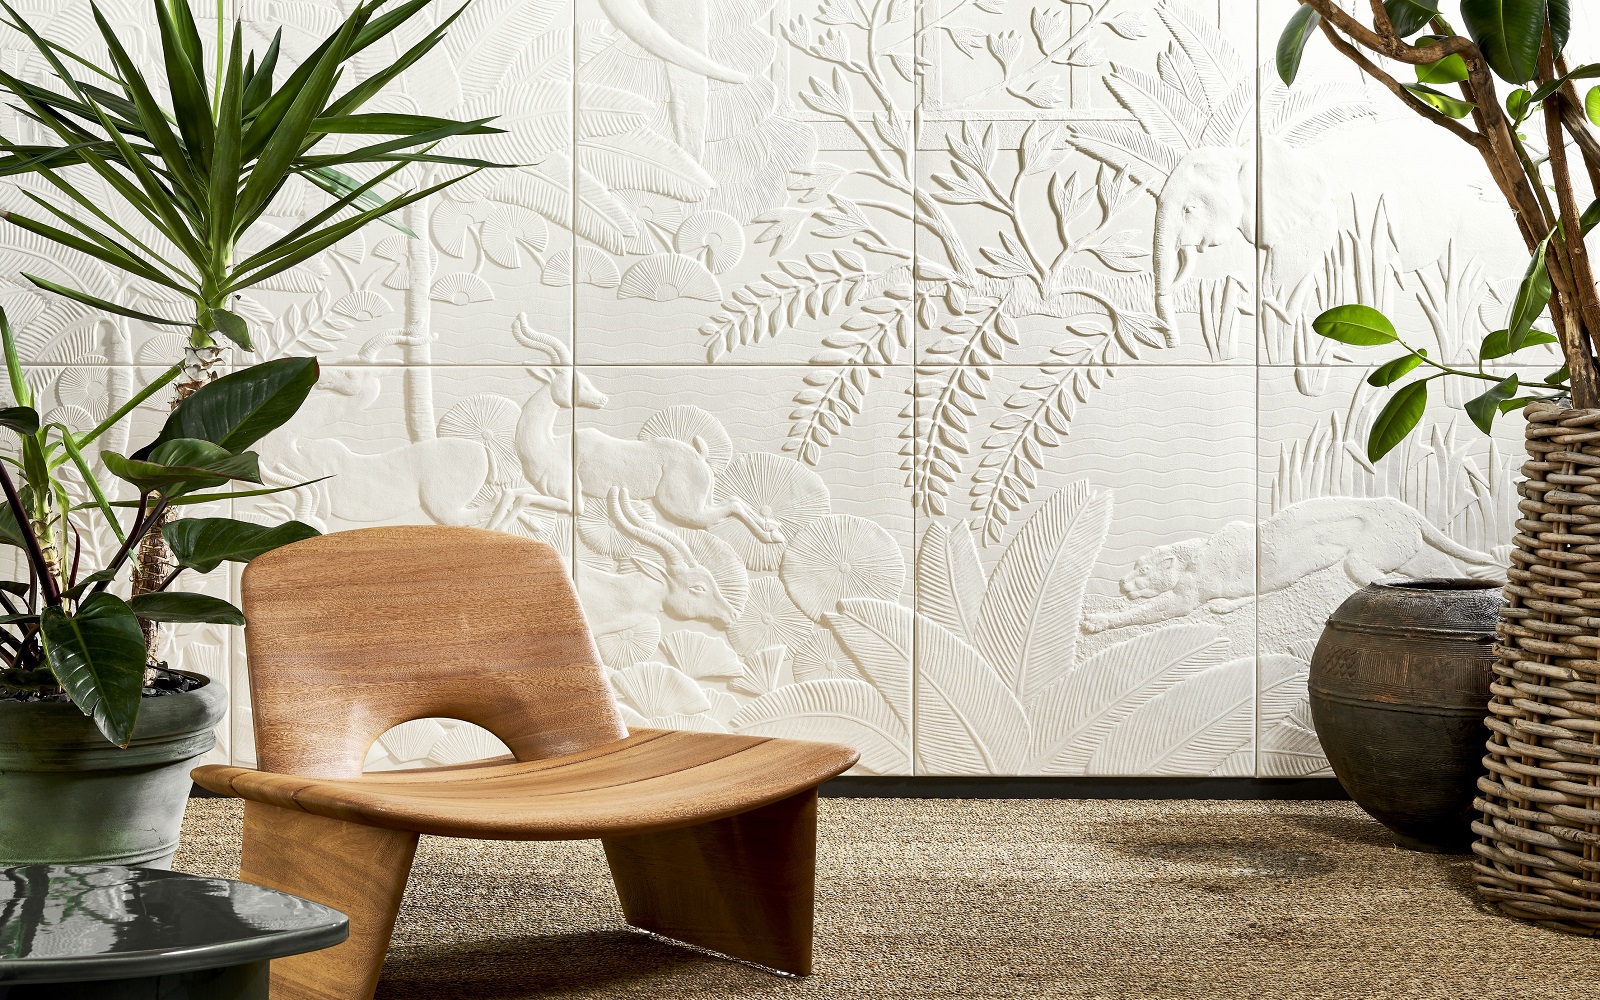 low wooden chair and plants in front of a relief design wallcovering in white showing plants and animals from the mythical babylon by Arte